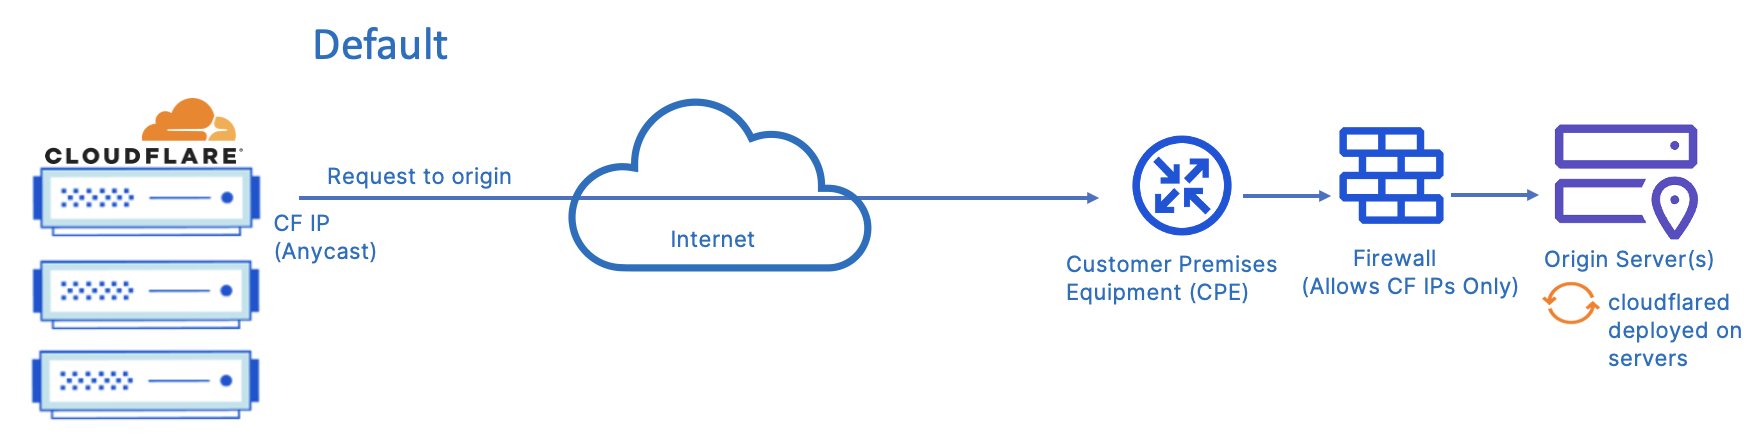 Cloudflare provides application performance and security services over Internet connectivity.